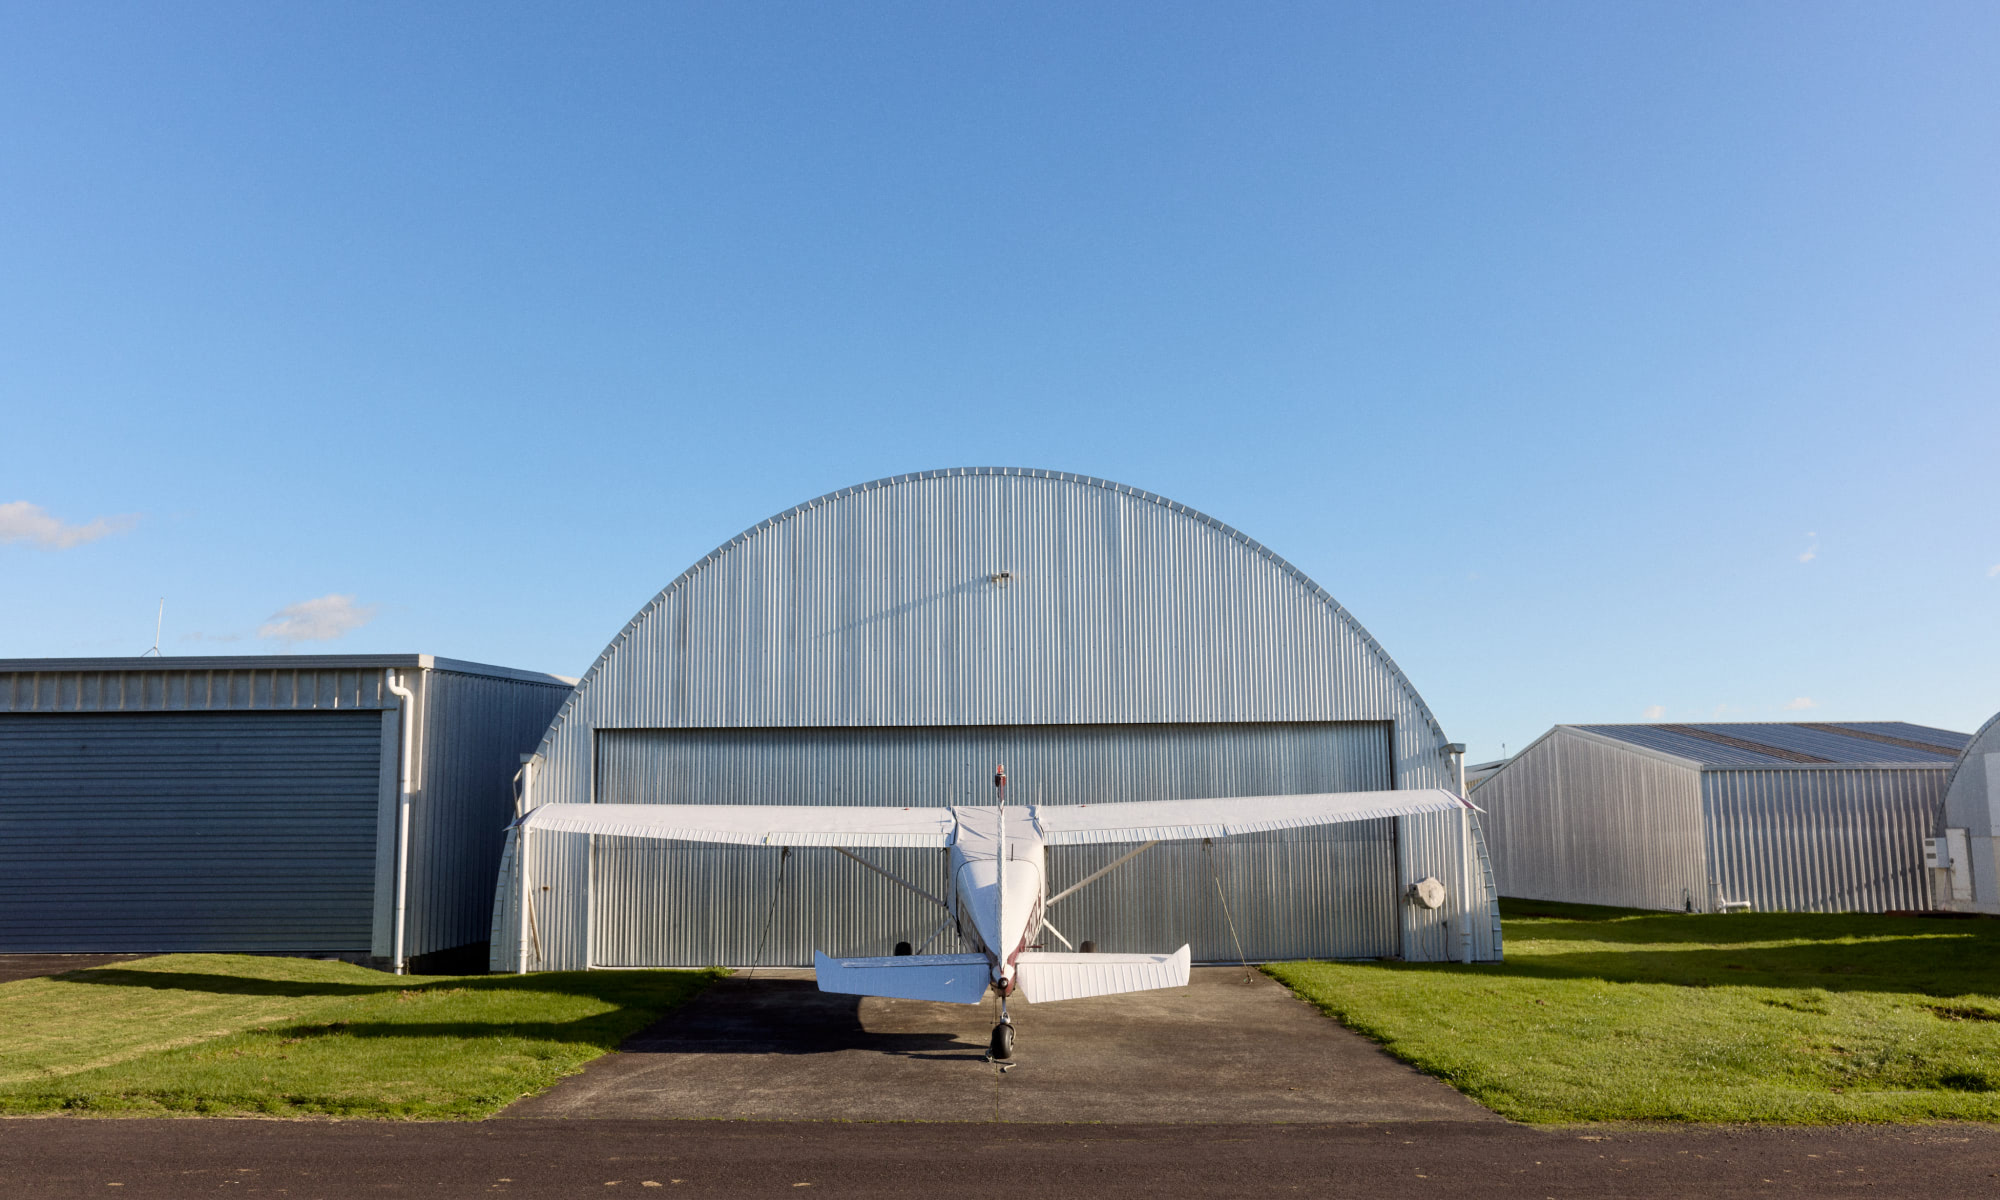 Plane outside hangar on clear sunny day